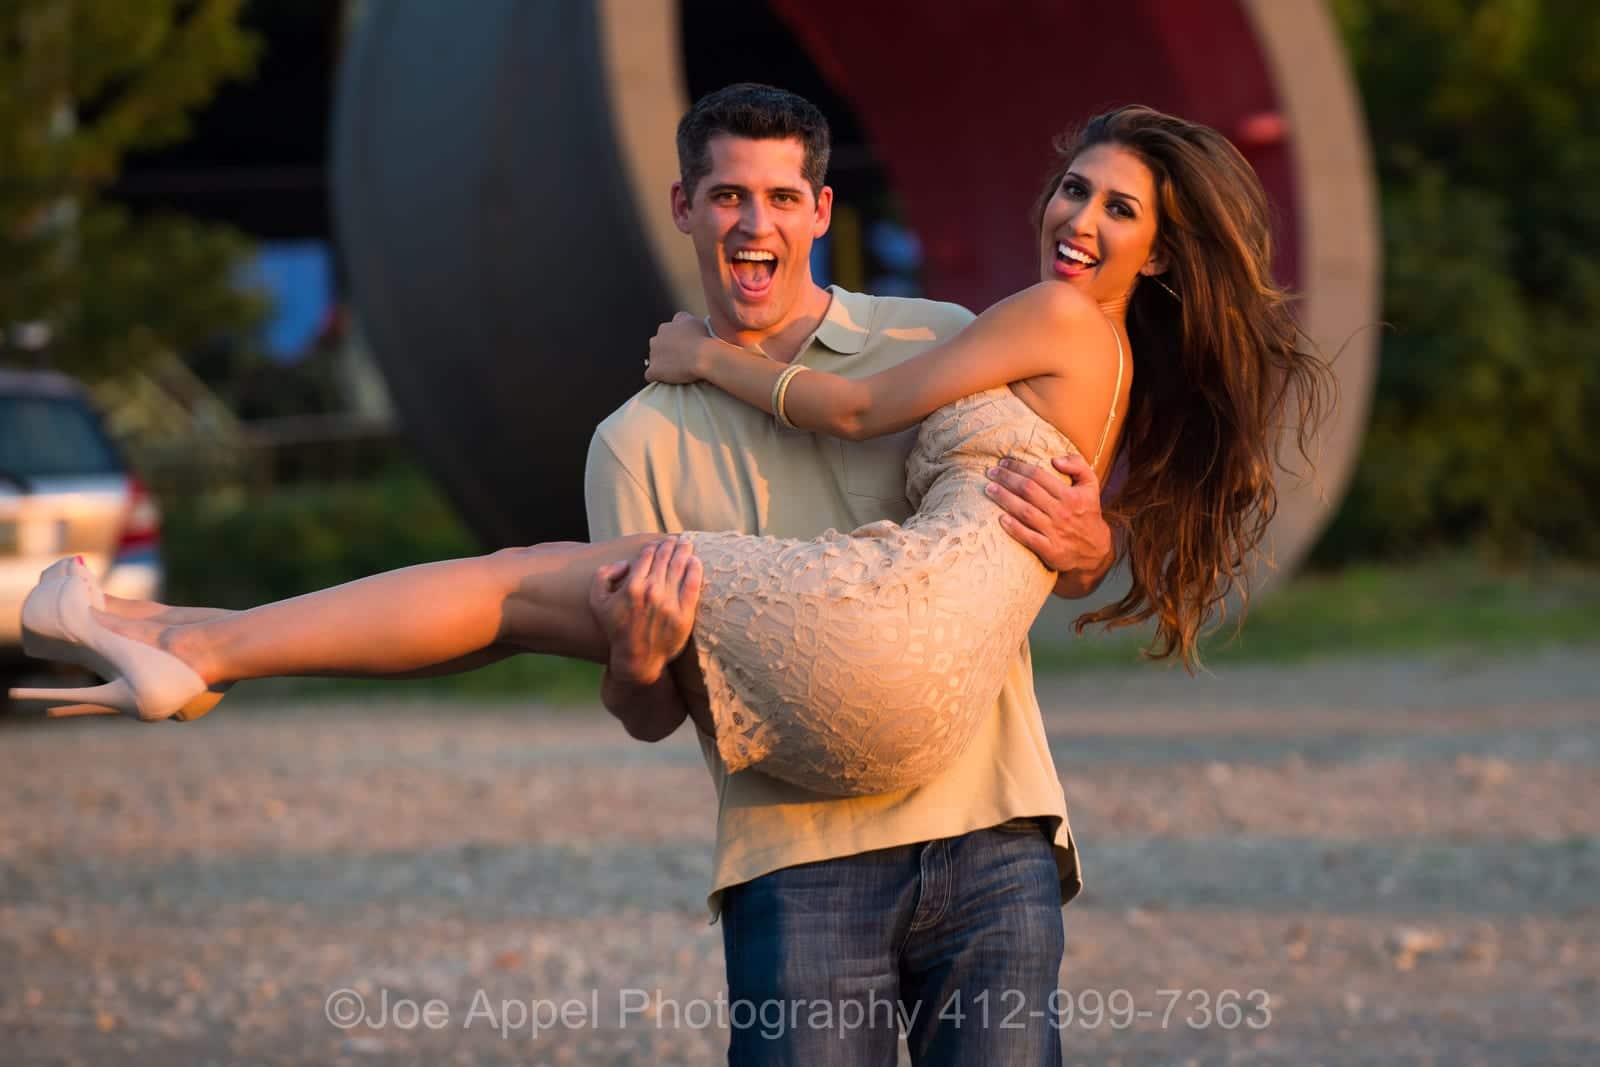 A man carries a woman wearing a tan dress as they laugh in front of an old crucible used in steel making during their Pump House Engagement Photography session.